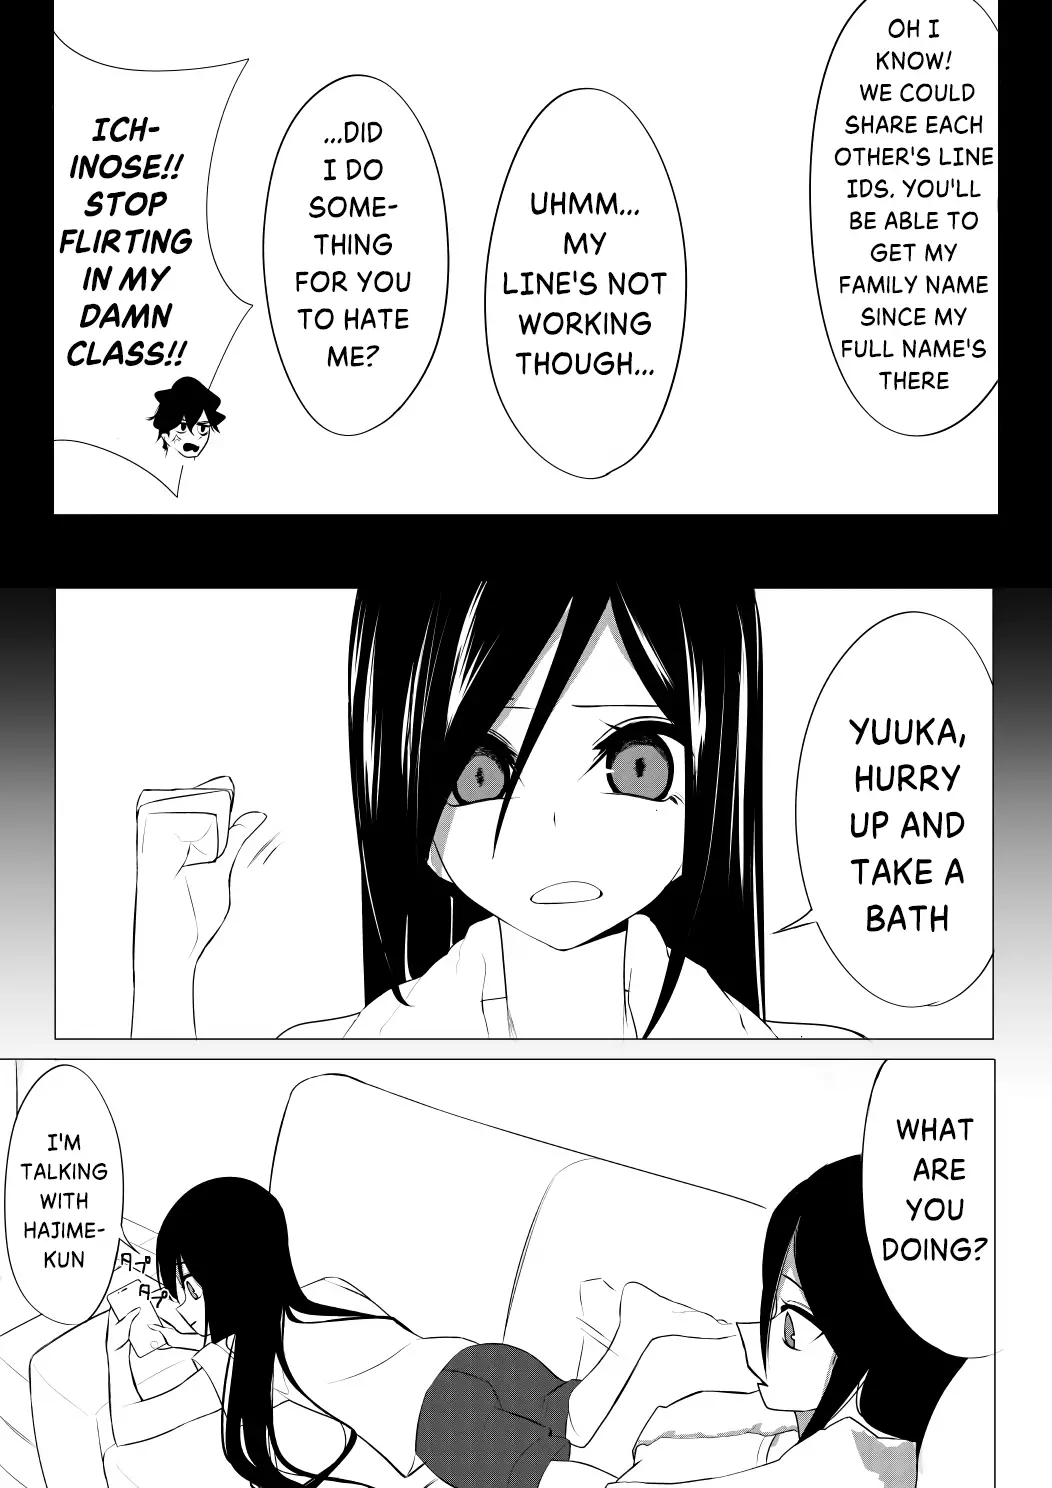 Mitsuishi-San Is Being Weird This Year - 8 page 5-6abfea4f